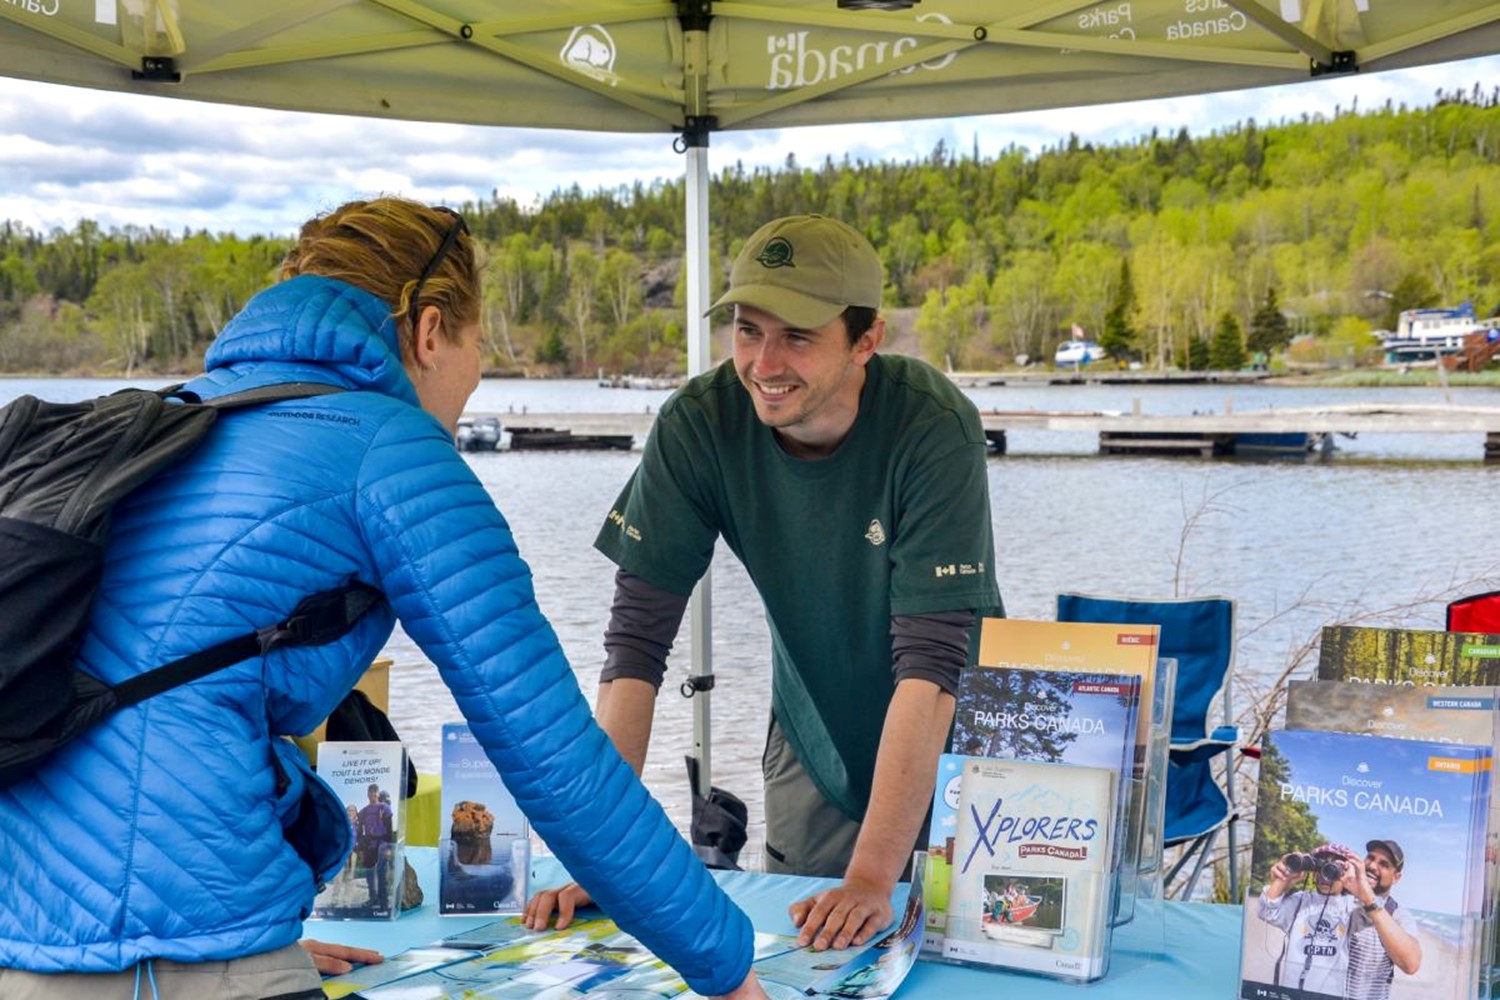 Parks Canada representative sharing information with a visitor at a booth, with water and trees in the background.